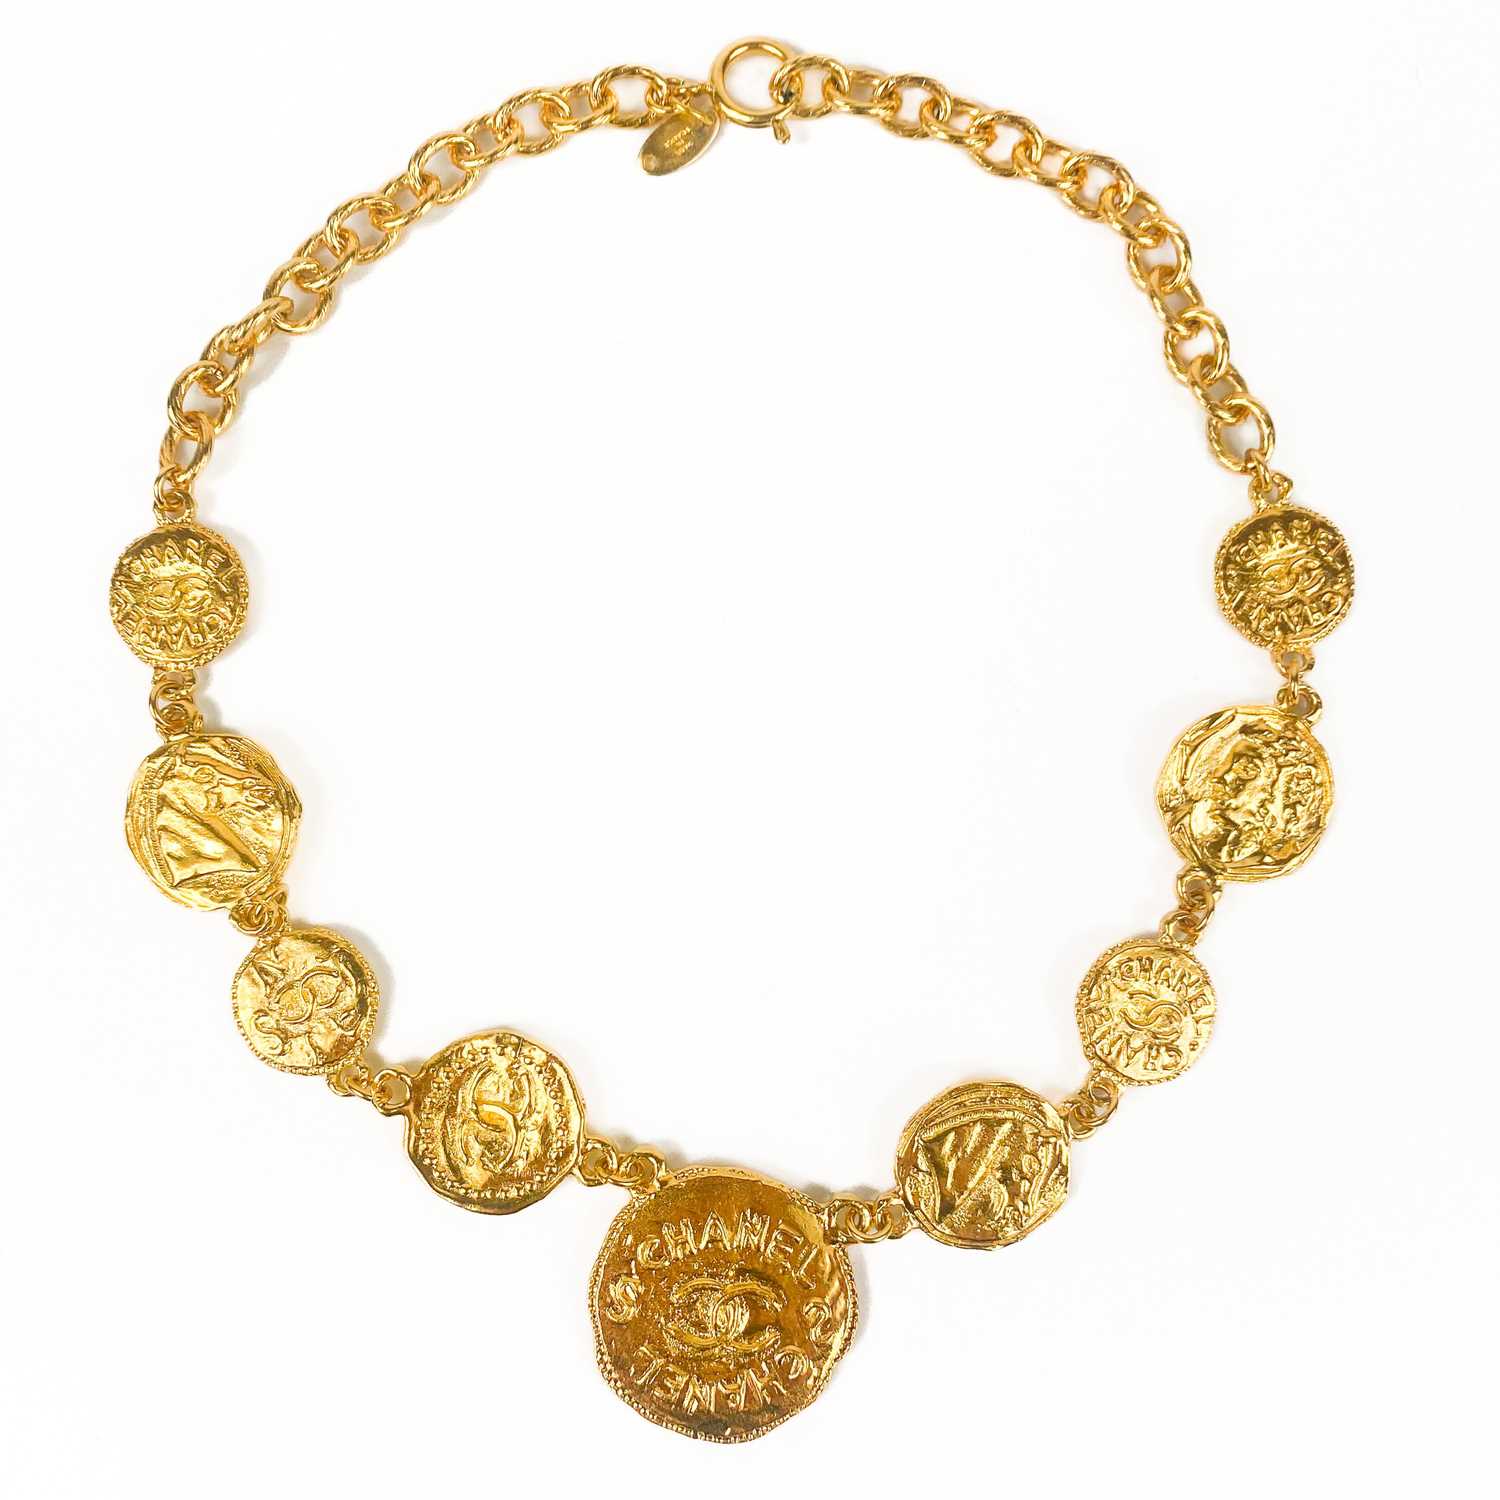 A Chanel 1980's CC medallion choker necklace. - Image 2 of 5